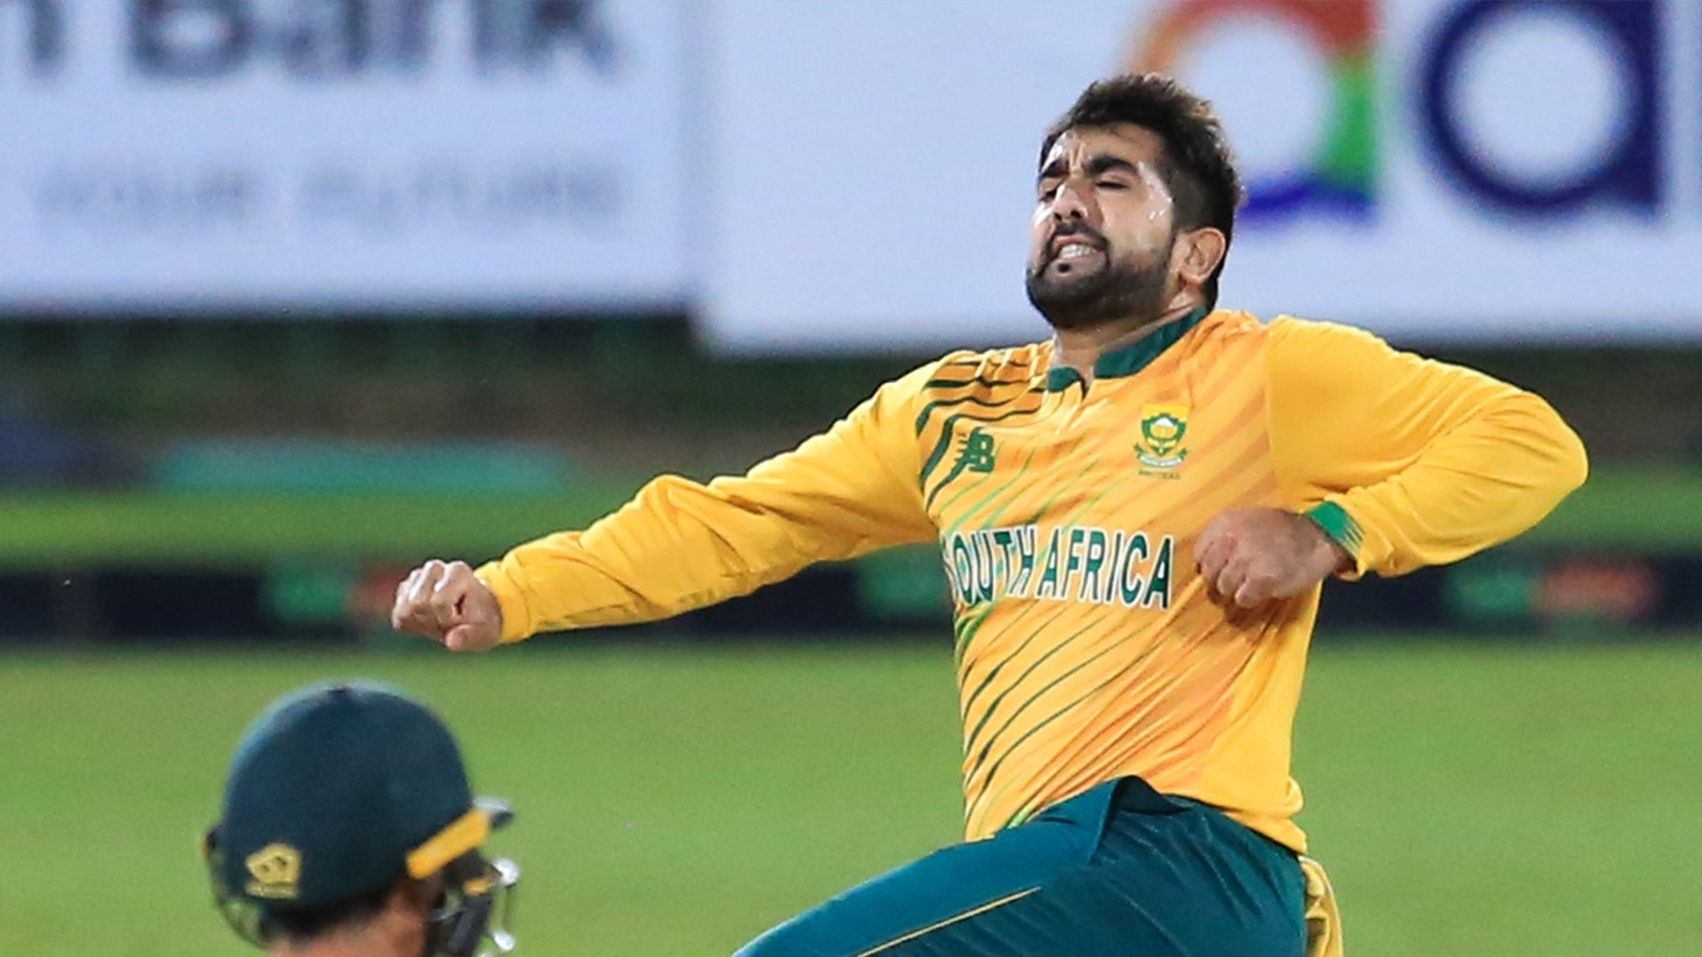 SL vs SA | 2nd T20I: Bowlers, Quinton de Kock seal series for South Africa 